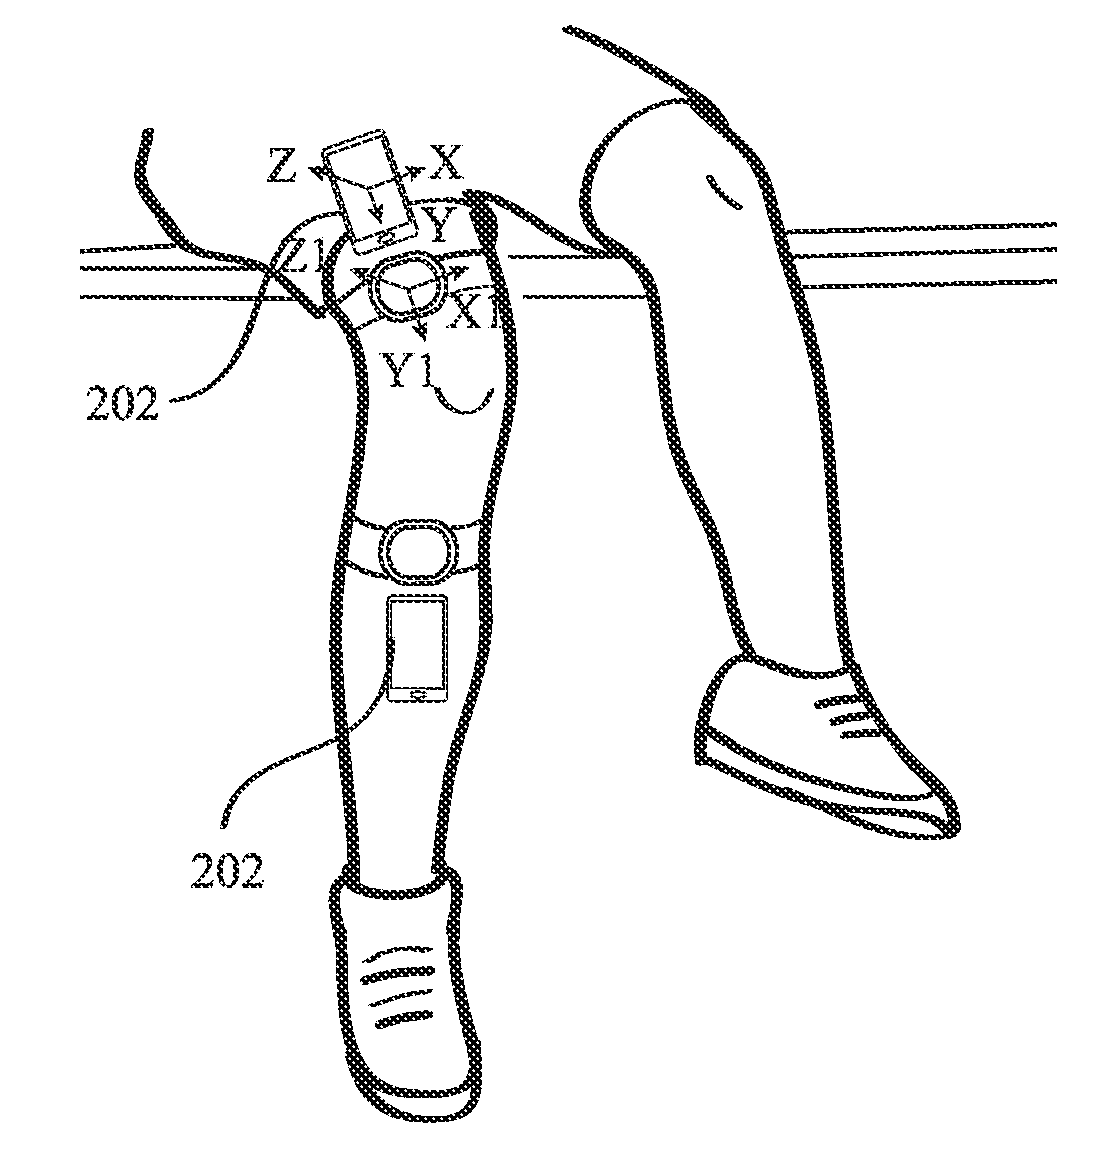 System and method for physical rehabilitation and motion training